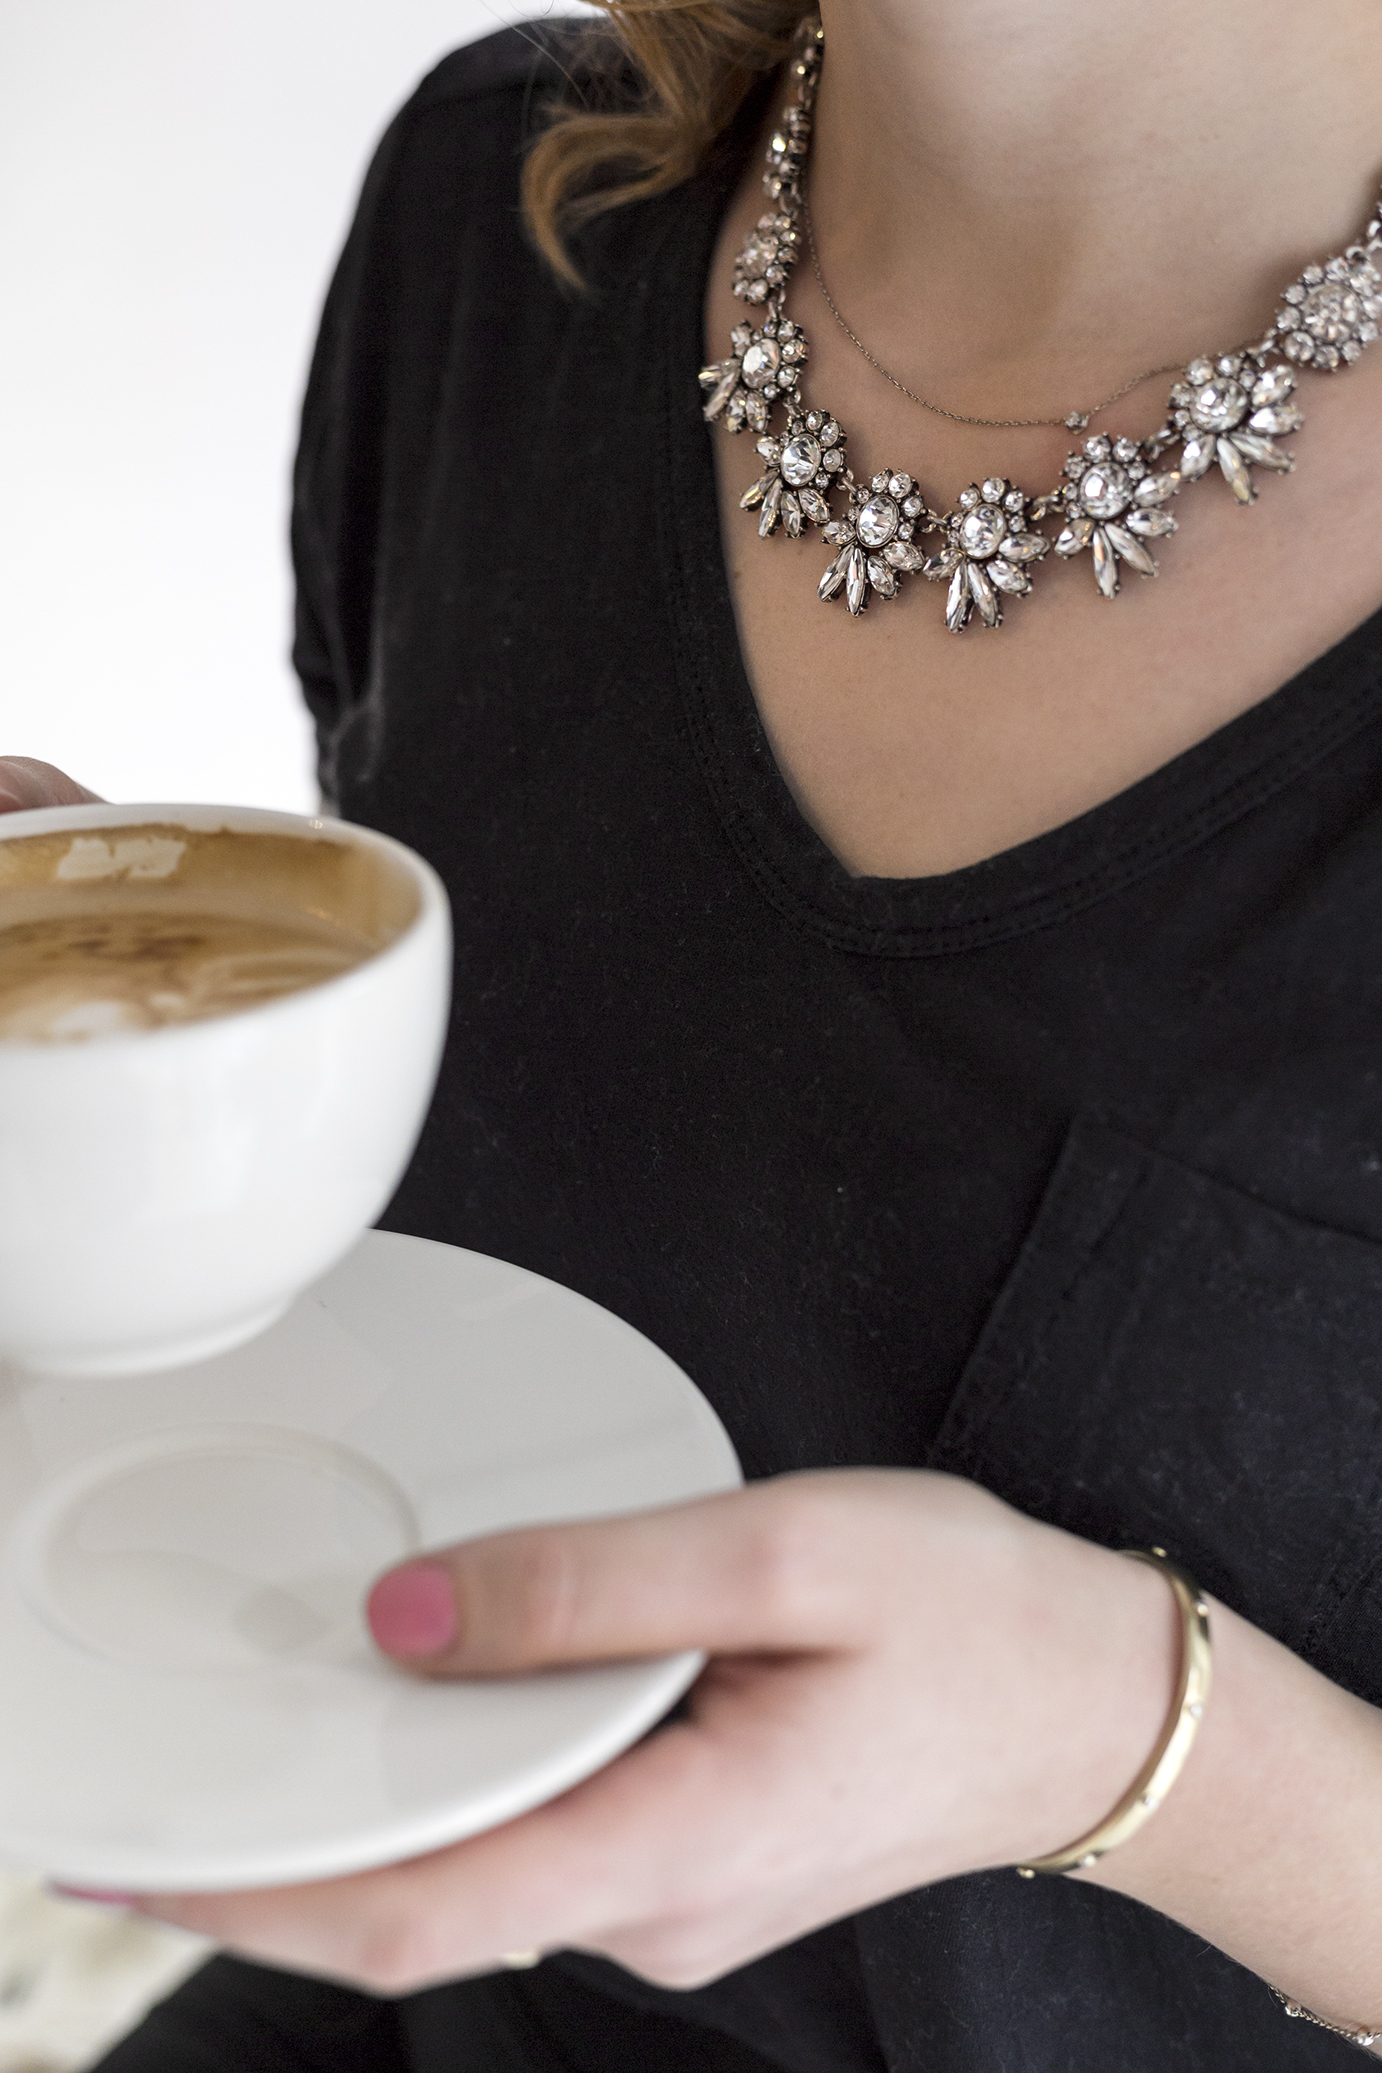 Coffee and beautiful necklace from HappyBoutique